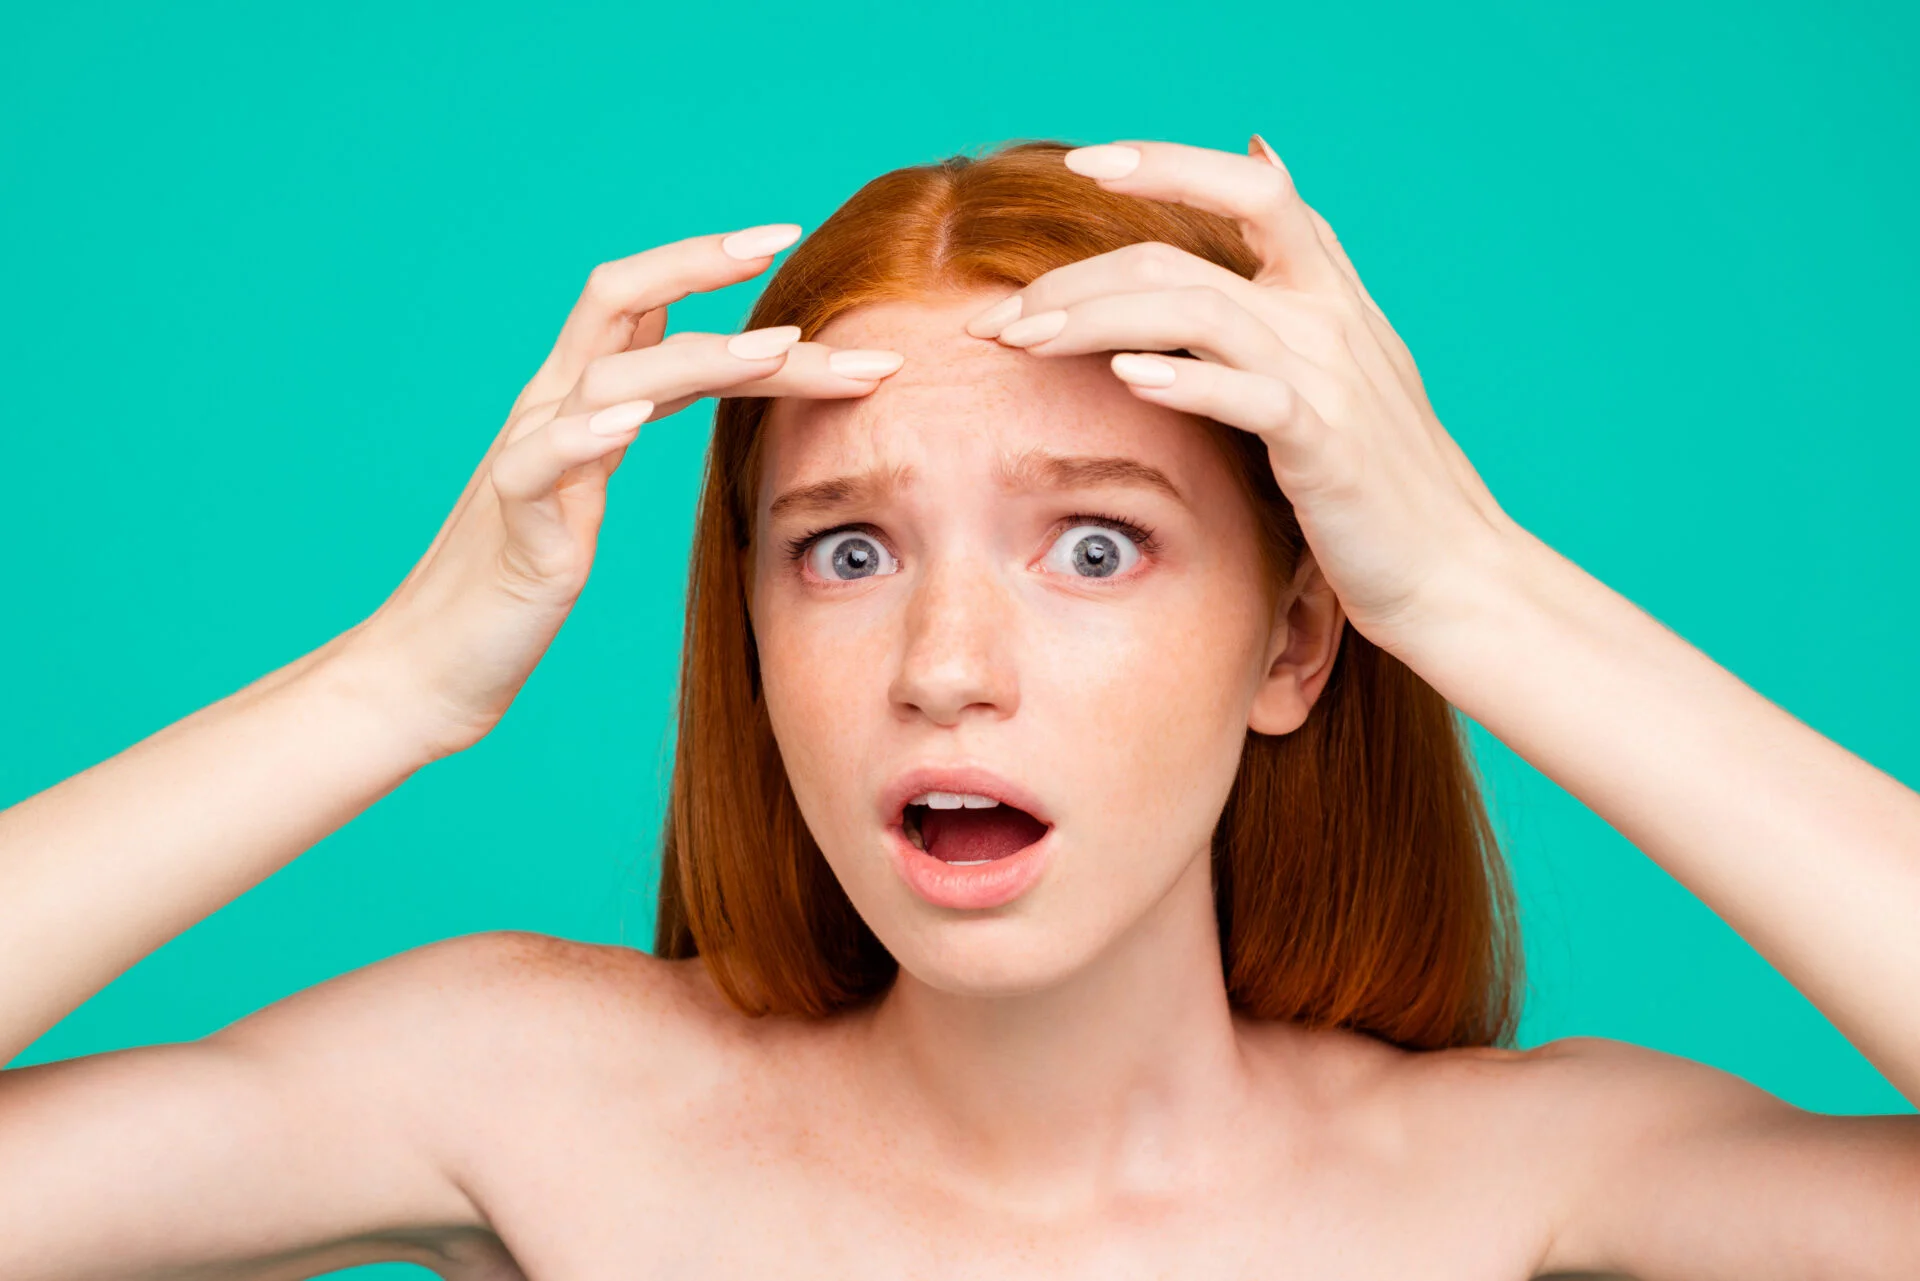 Anti acne. Close-up portrait of worried nice attractive red-haired girl with shiny pure clean skin, touching forehead, isolated over green turquoise background